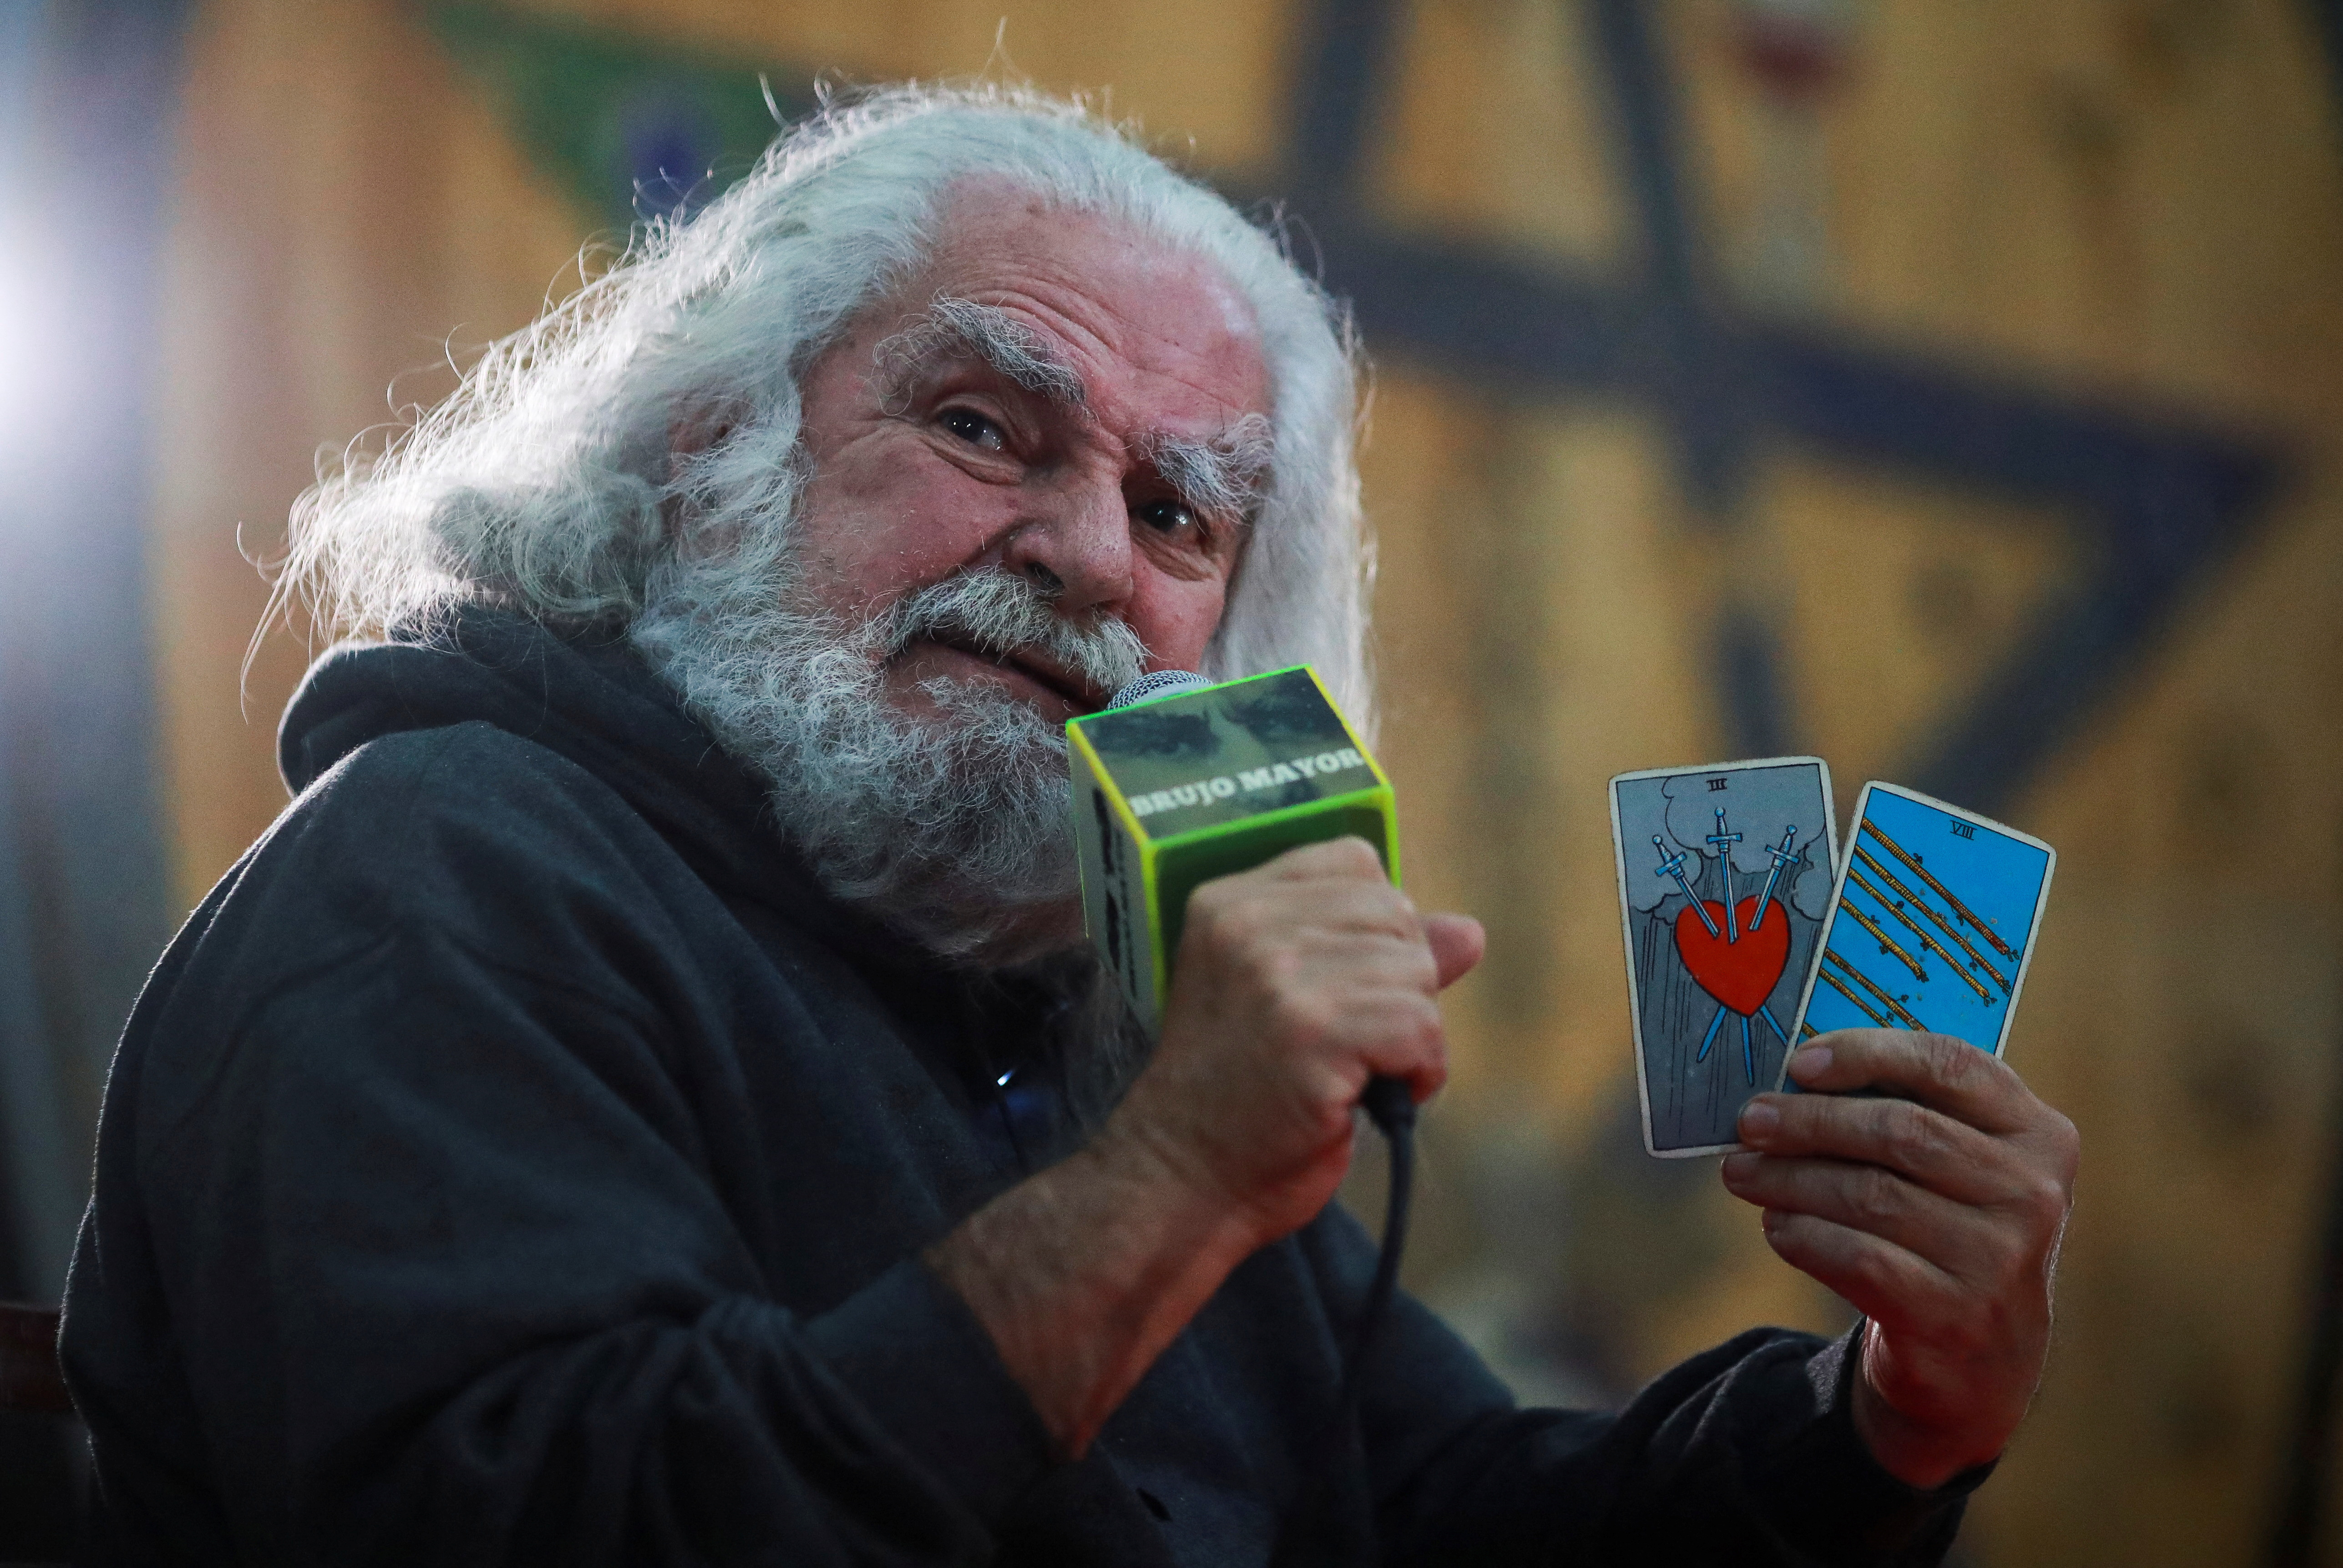 Antonio Vazquez Alba "Senior Warlock"also known as Mexico's Grand Warlock, holds tarot cards during a ceremony to make his predictions for the year 2023, in Mexico City, Mexico January 3, 2023. REUTERS/Henry Romero